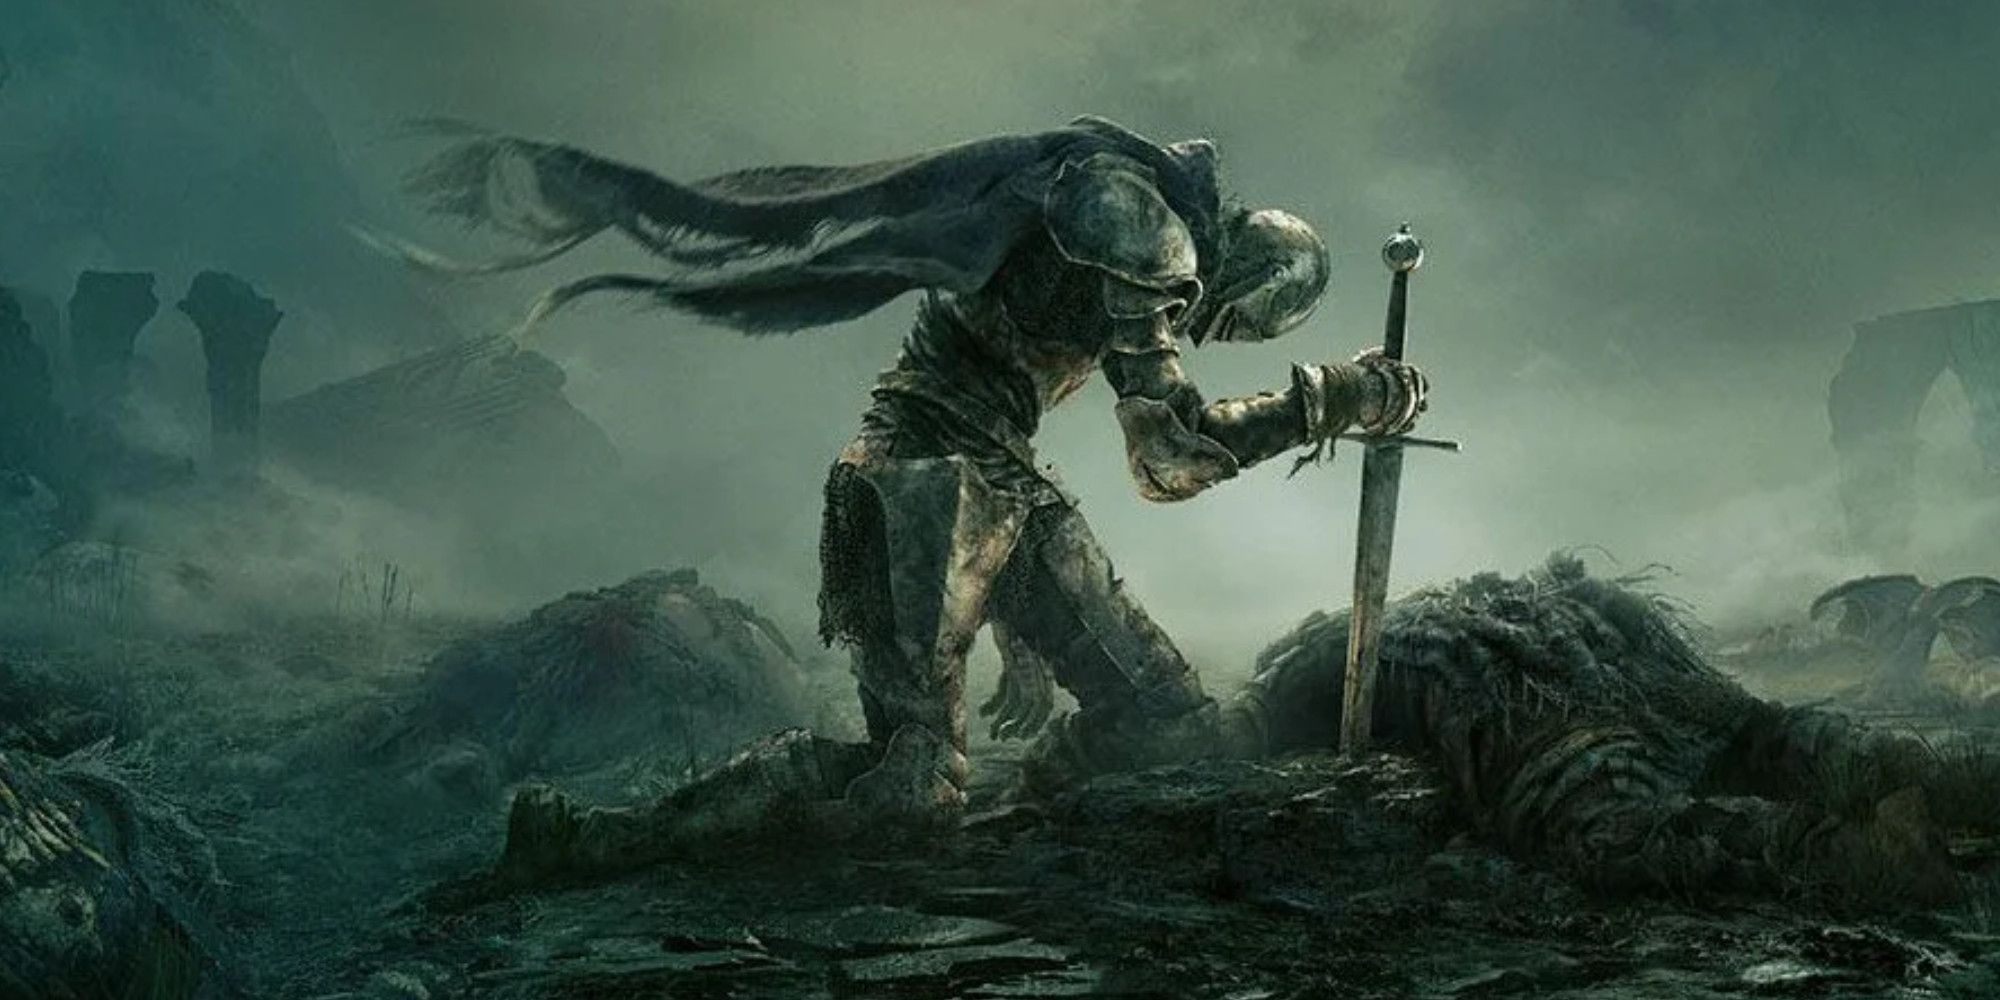 Elden Ring knight from the game's front cover on their knees